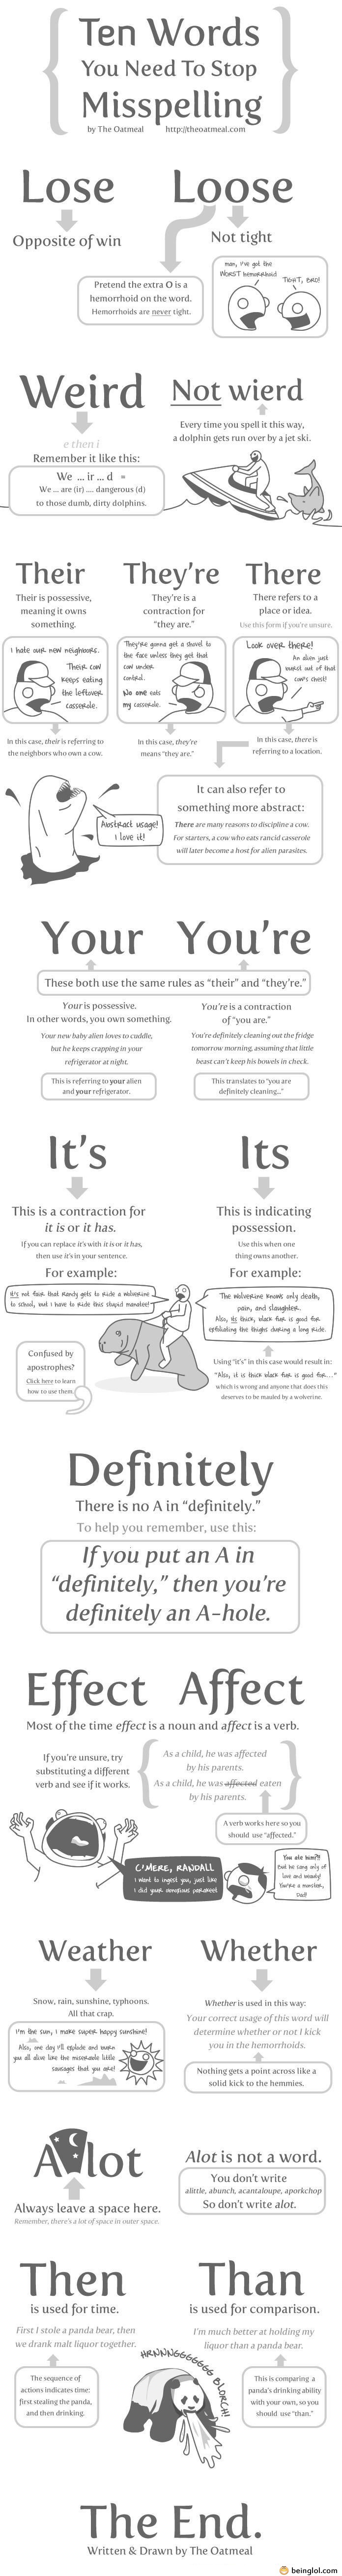 Some Spelling Lessons by the Oatmeal